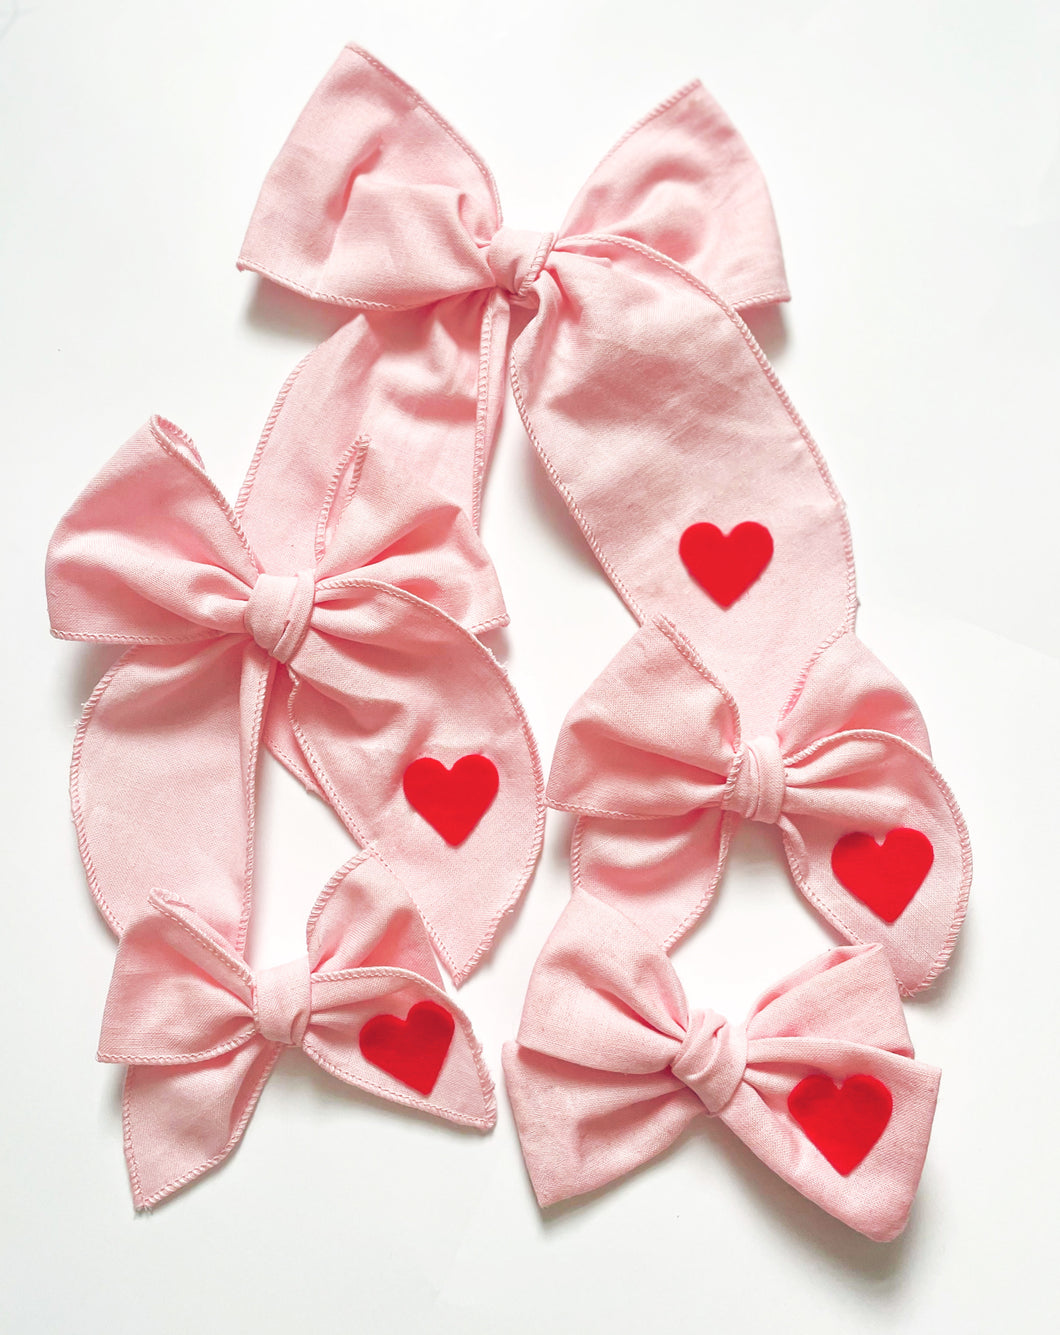 The Pink Heart Bow